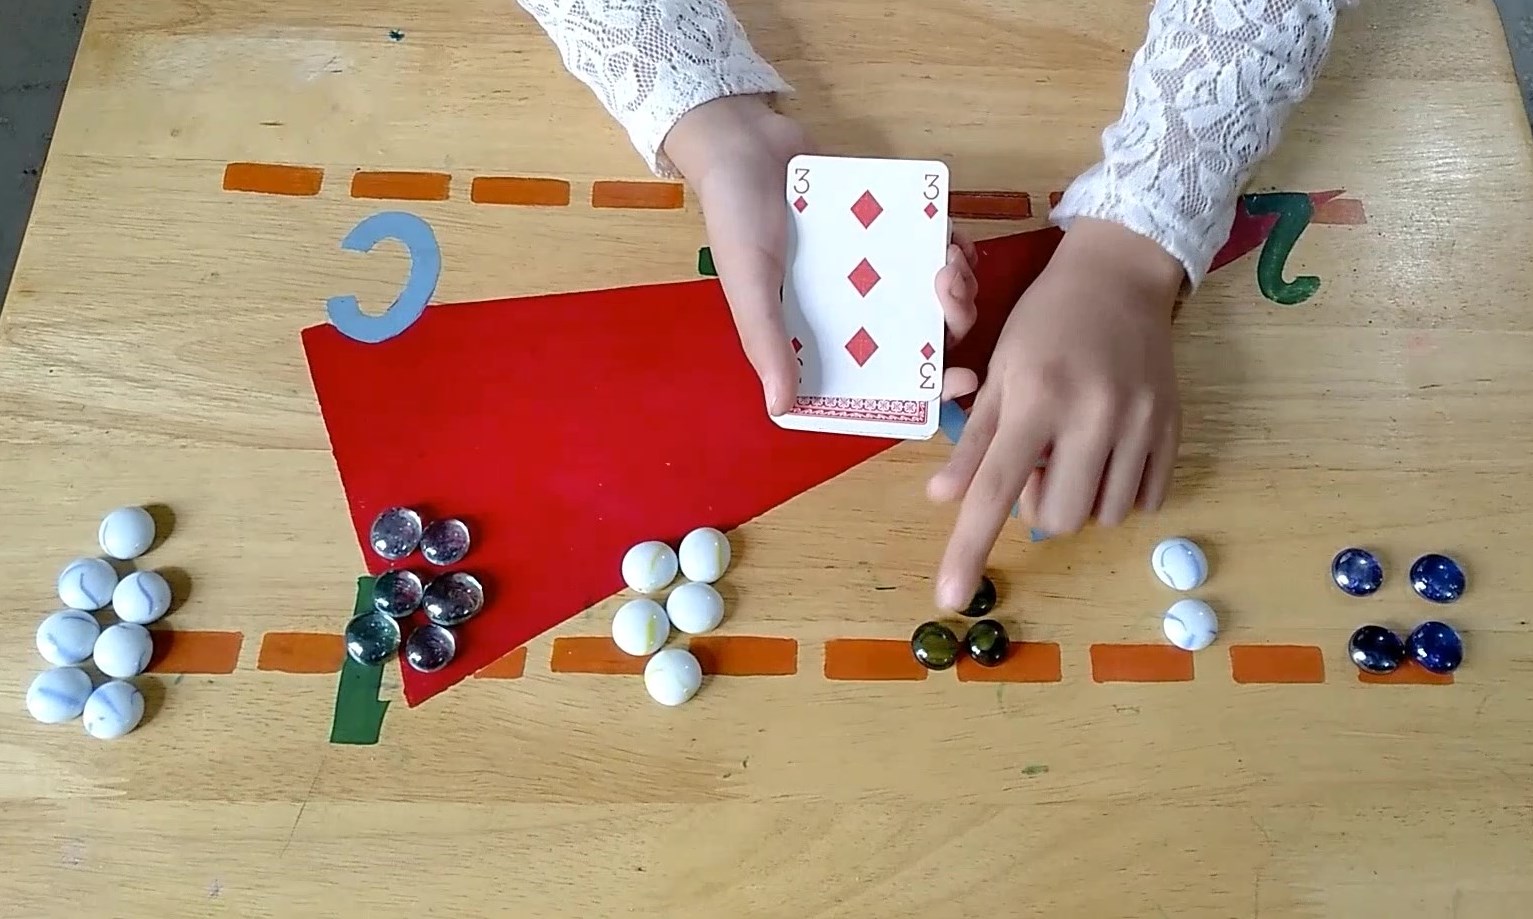 Count And Match Activity For Preschoolers Using Playing Cards